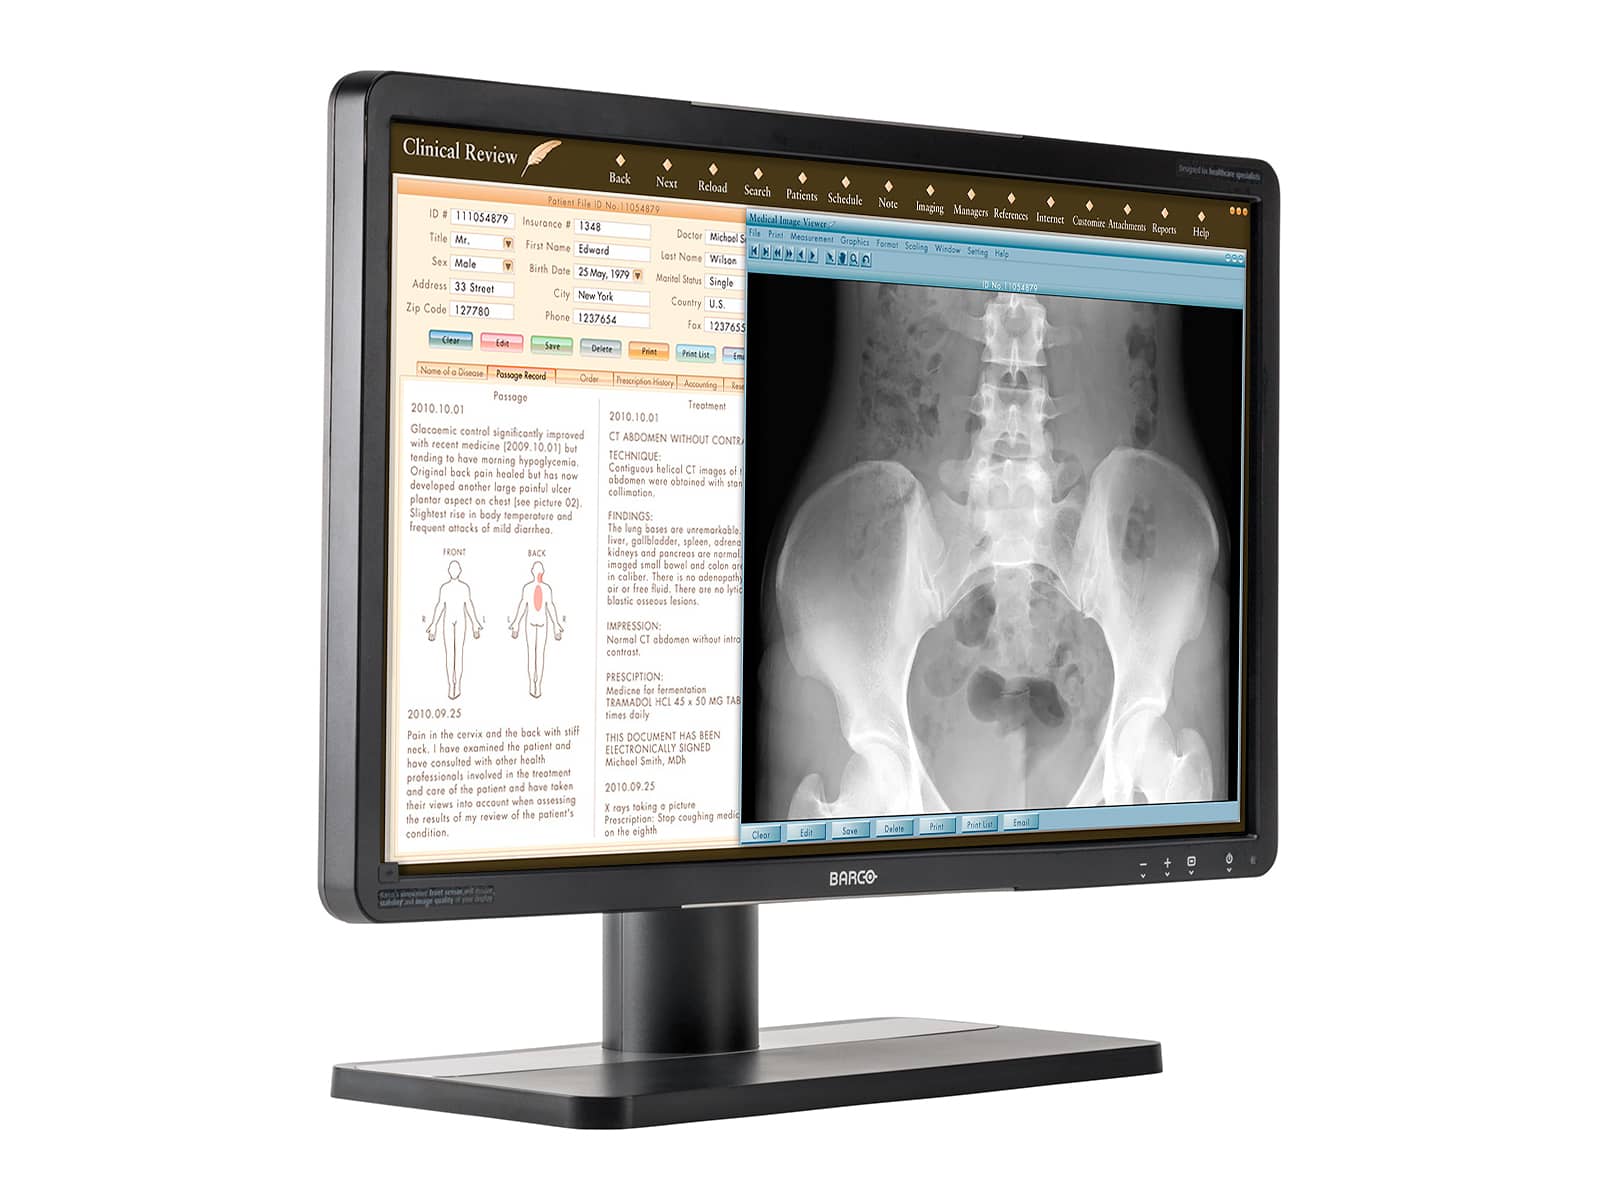 Barco Eonis MDRC-2122 2MP 22" Clinical Review LED Monitor (K9301850A) Monitors.com 